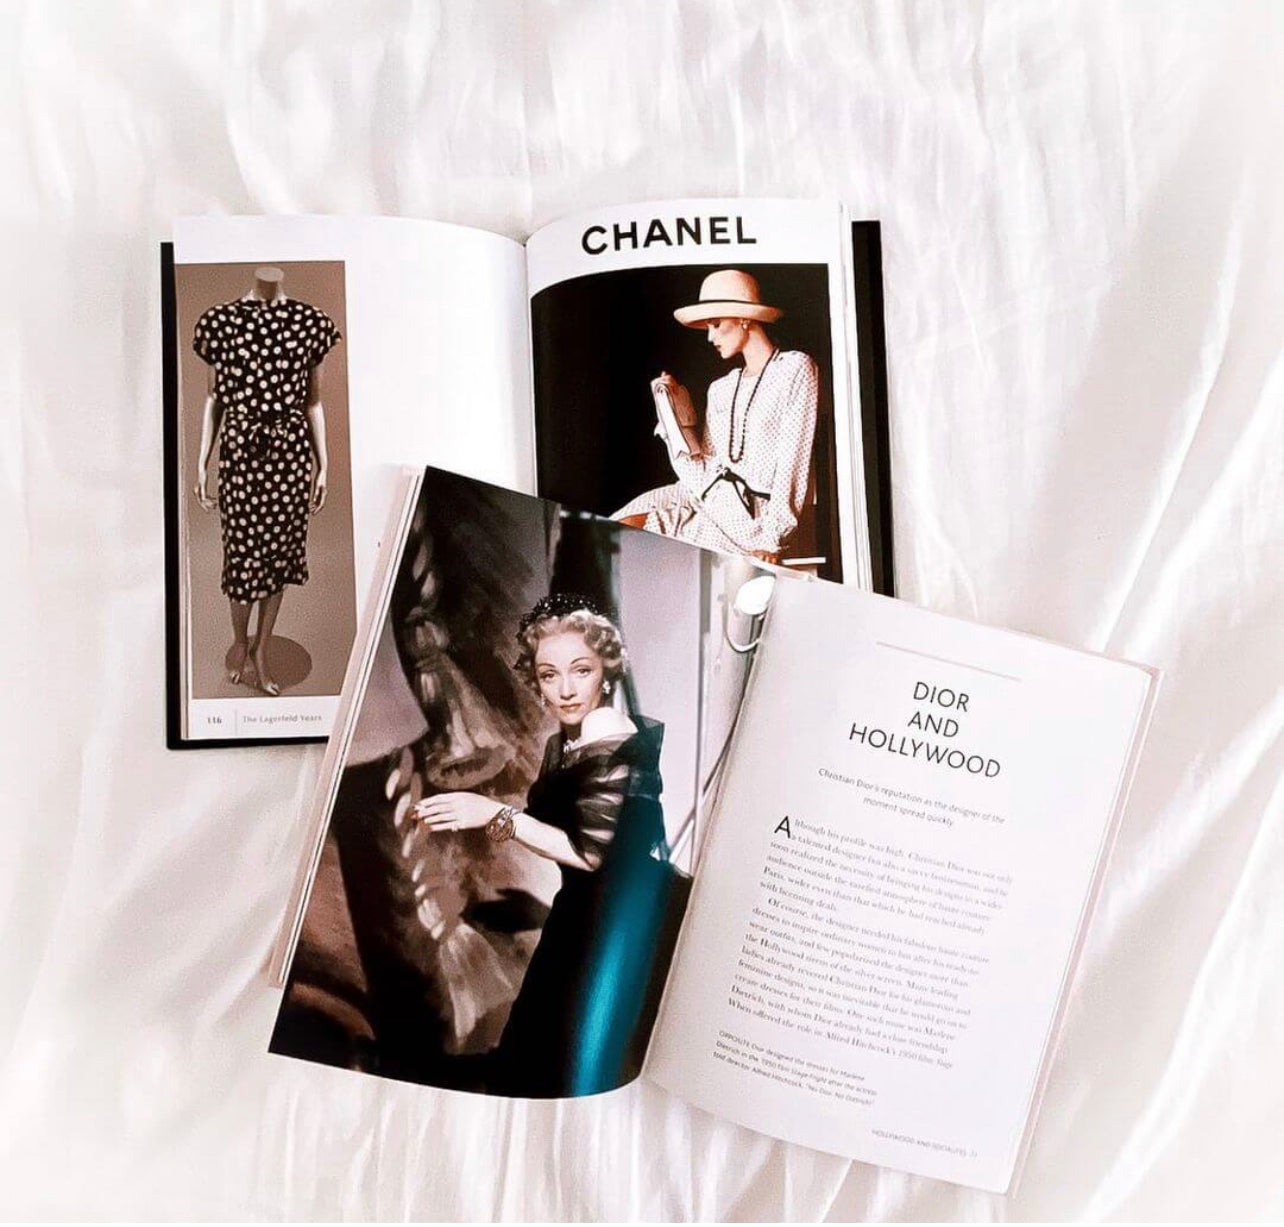 Little Book of Chanel Coffee Table Book